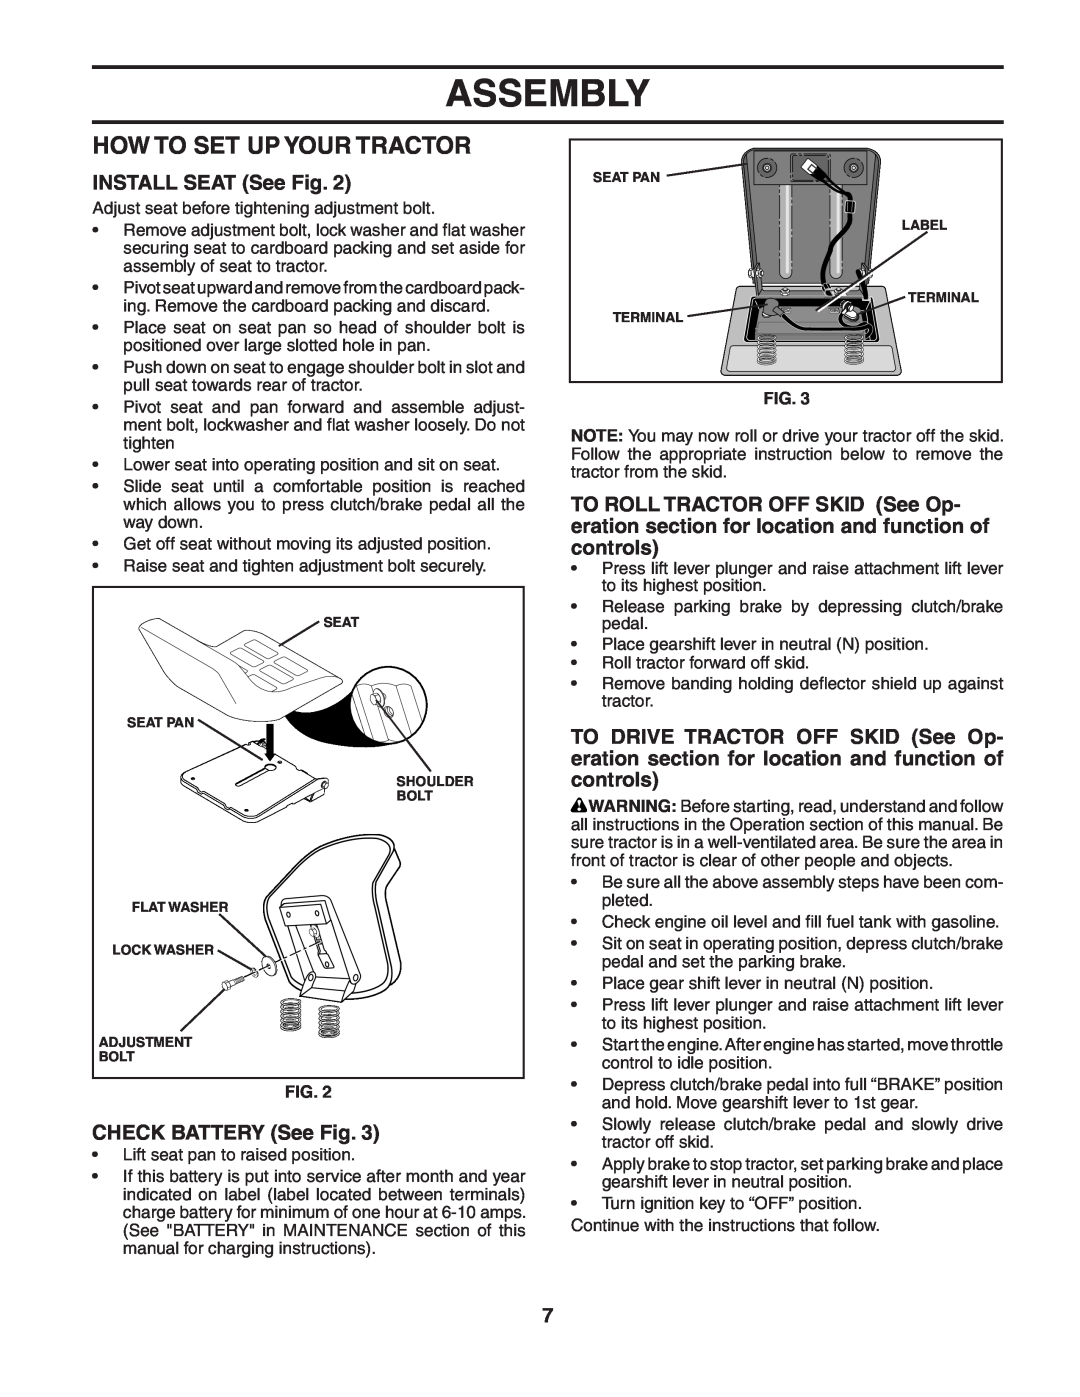 Poulan PO17542STA manual How To Set Up Your Tractor, INSTALL SEAT See Fig, CHECK BATTERY See Fig, Assembly 